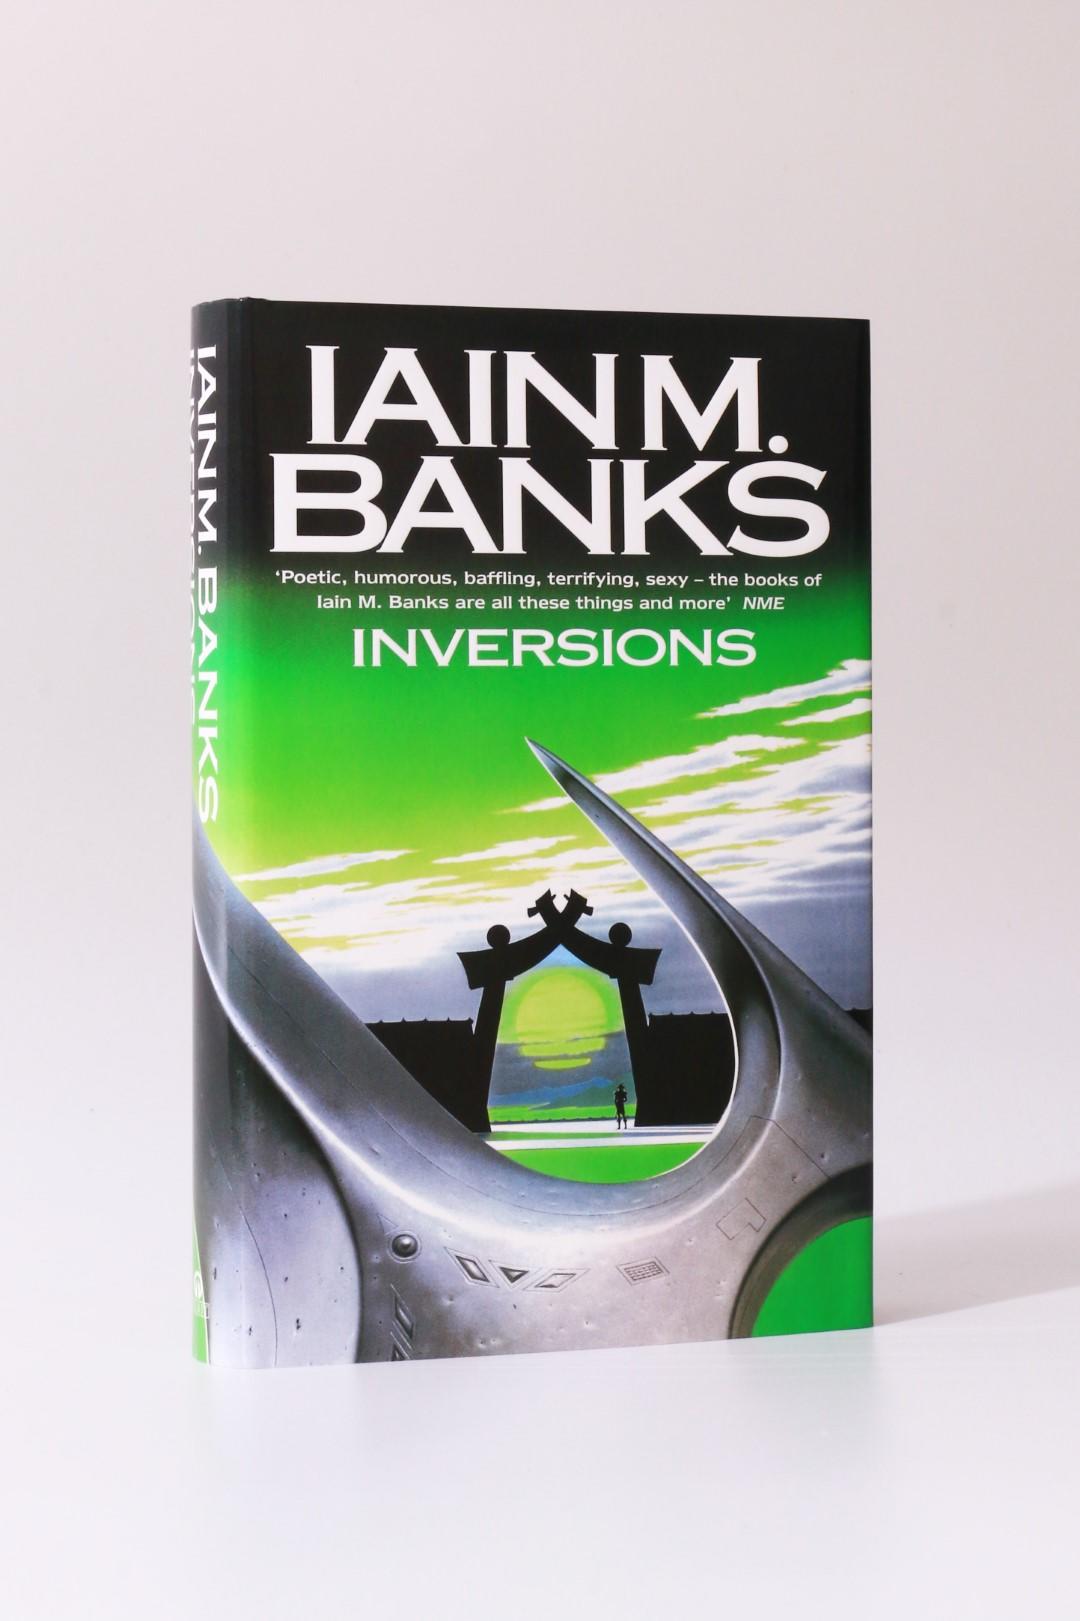 Iain M. Banks - Inversions - Orbit, 1998, Signed First Edition.